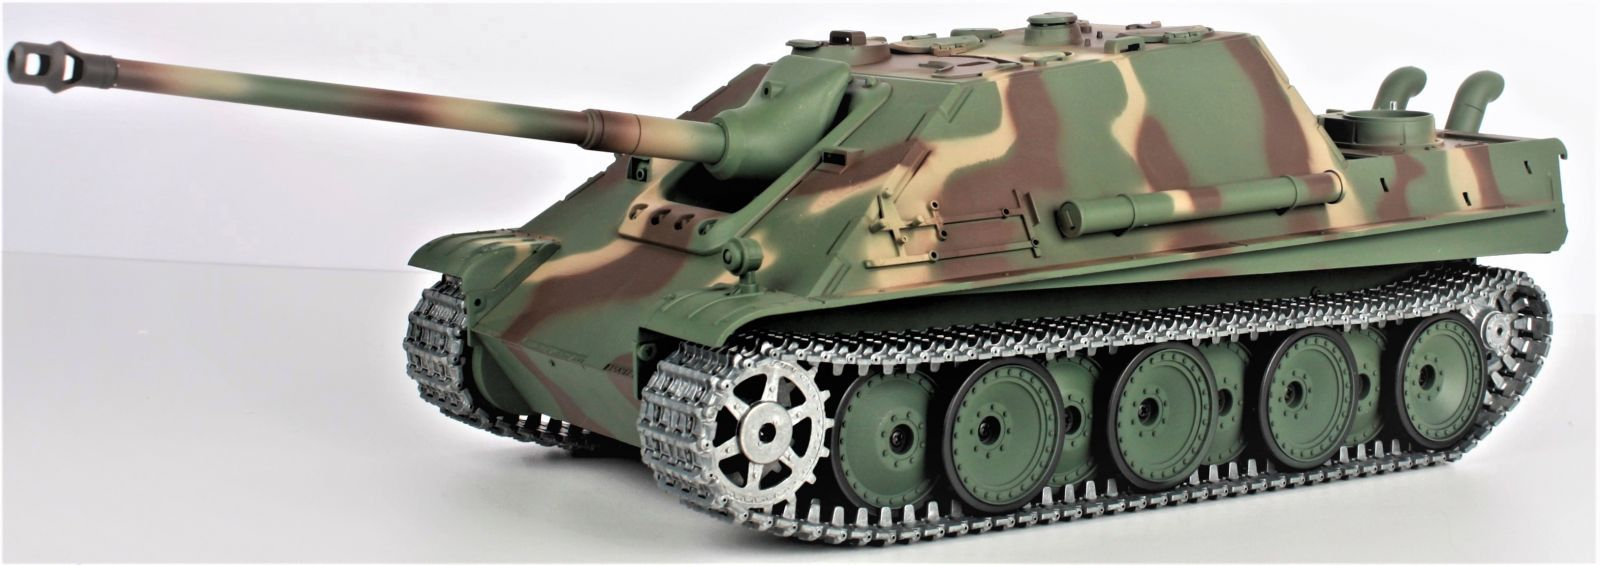 RC TANK German Jagdpanther 1:16, smoke and sound effects, steel addons and tracks, shoots pellets